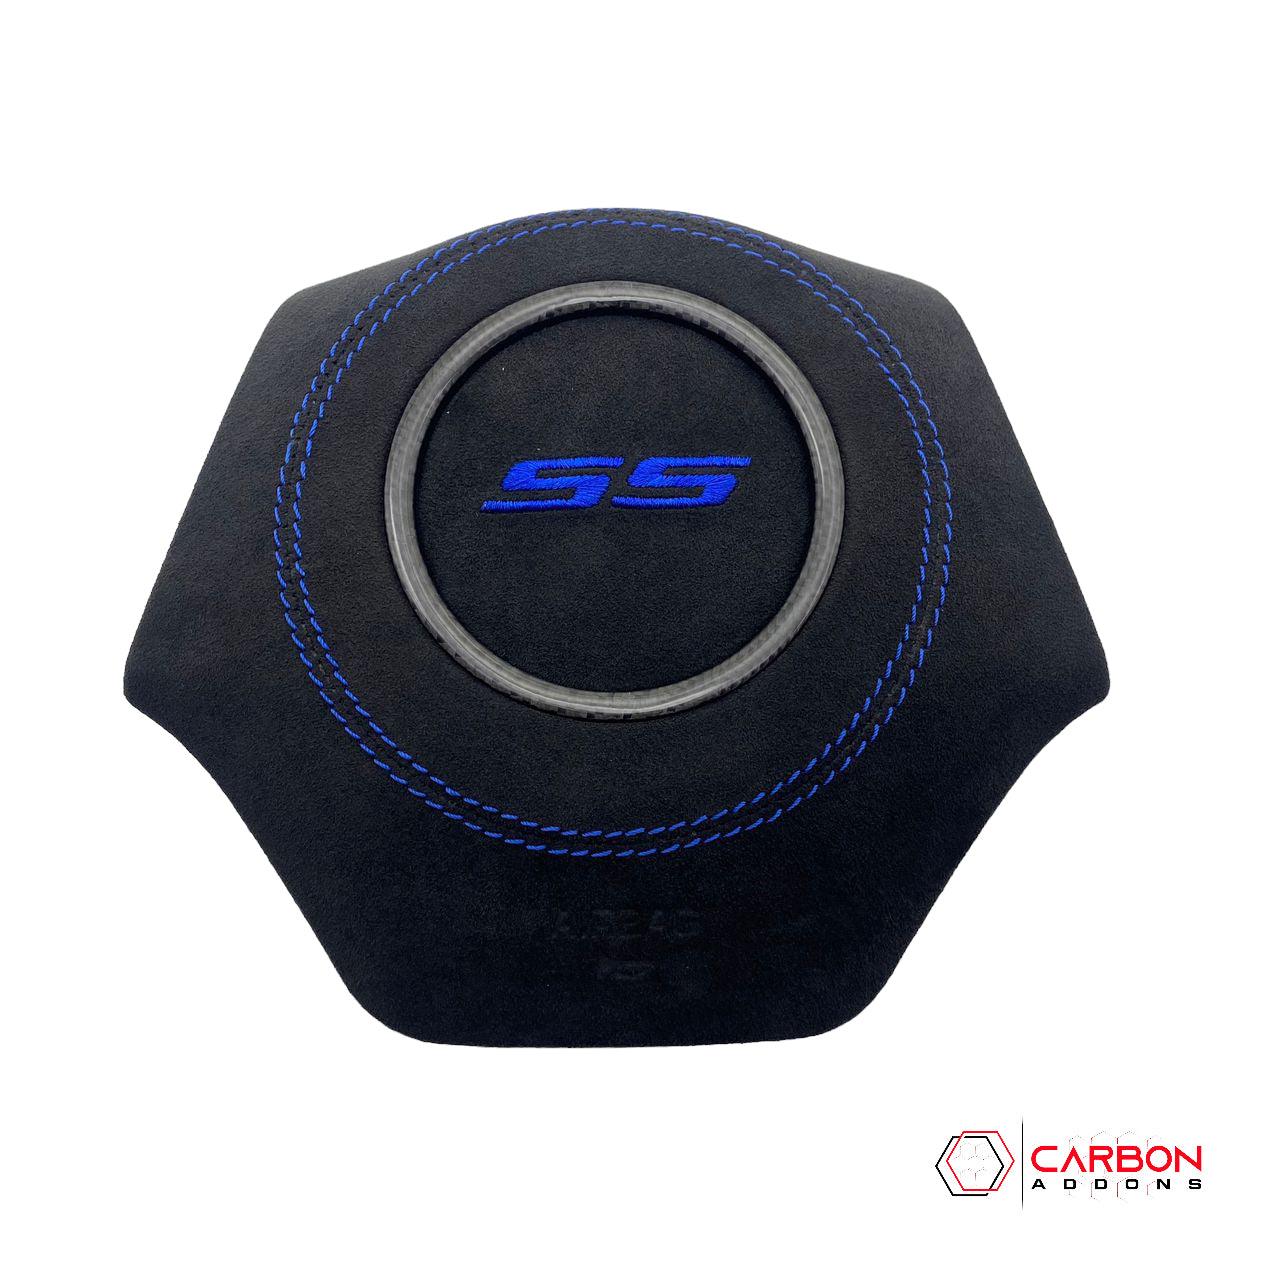 2016-2024 Chevy Camaro Custom Airbag Housing Cover - carbonaddons Carbon Fiber Parts, Accessories, Upgrades, Mods